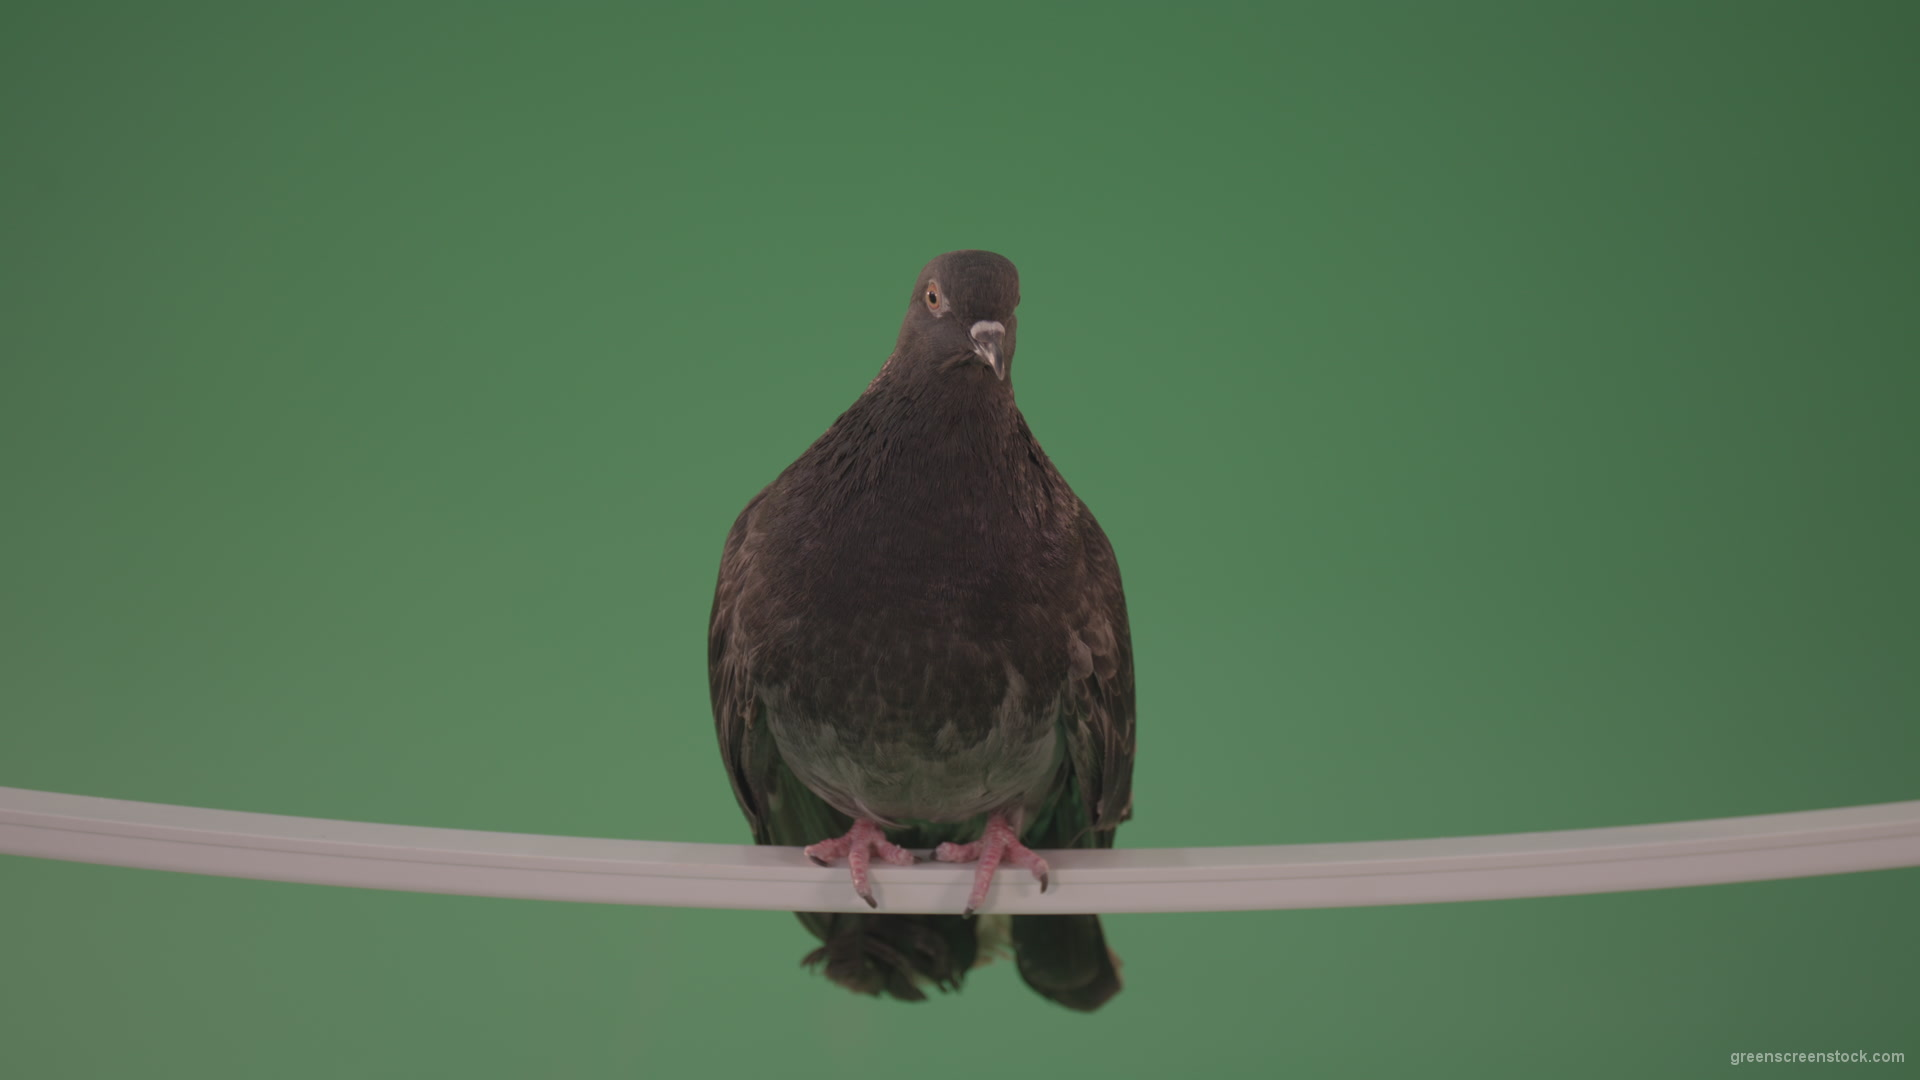 Gray-wild-bird-doves-sitting-on-a-branch-in-the-city-isolated-in-green-screen-studio_004 Green Screen Stock